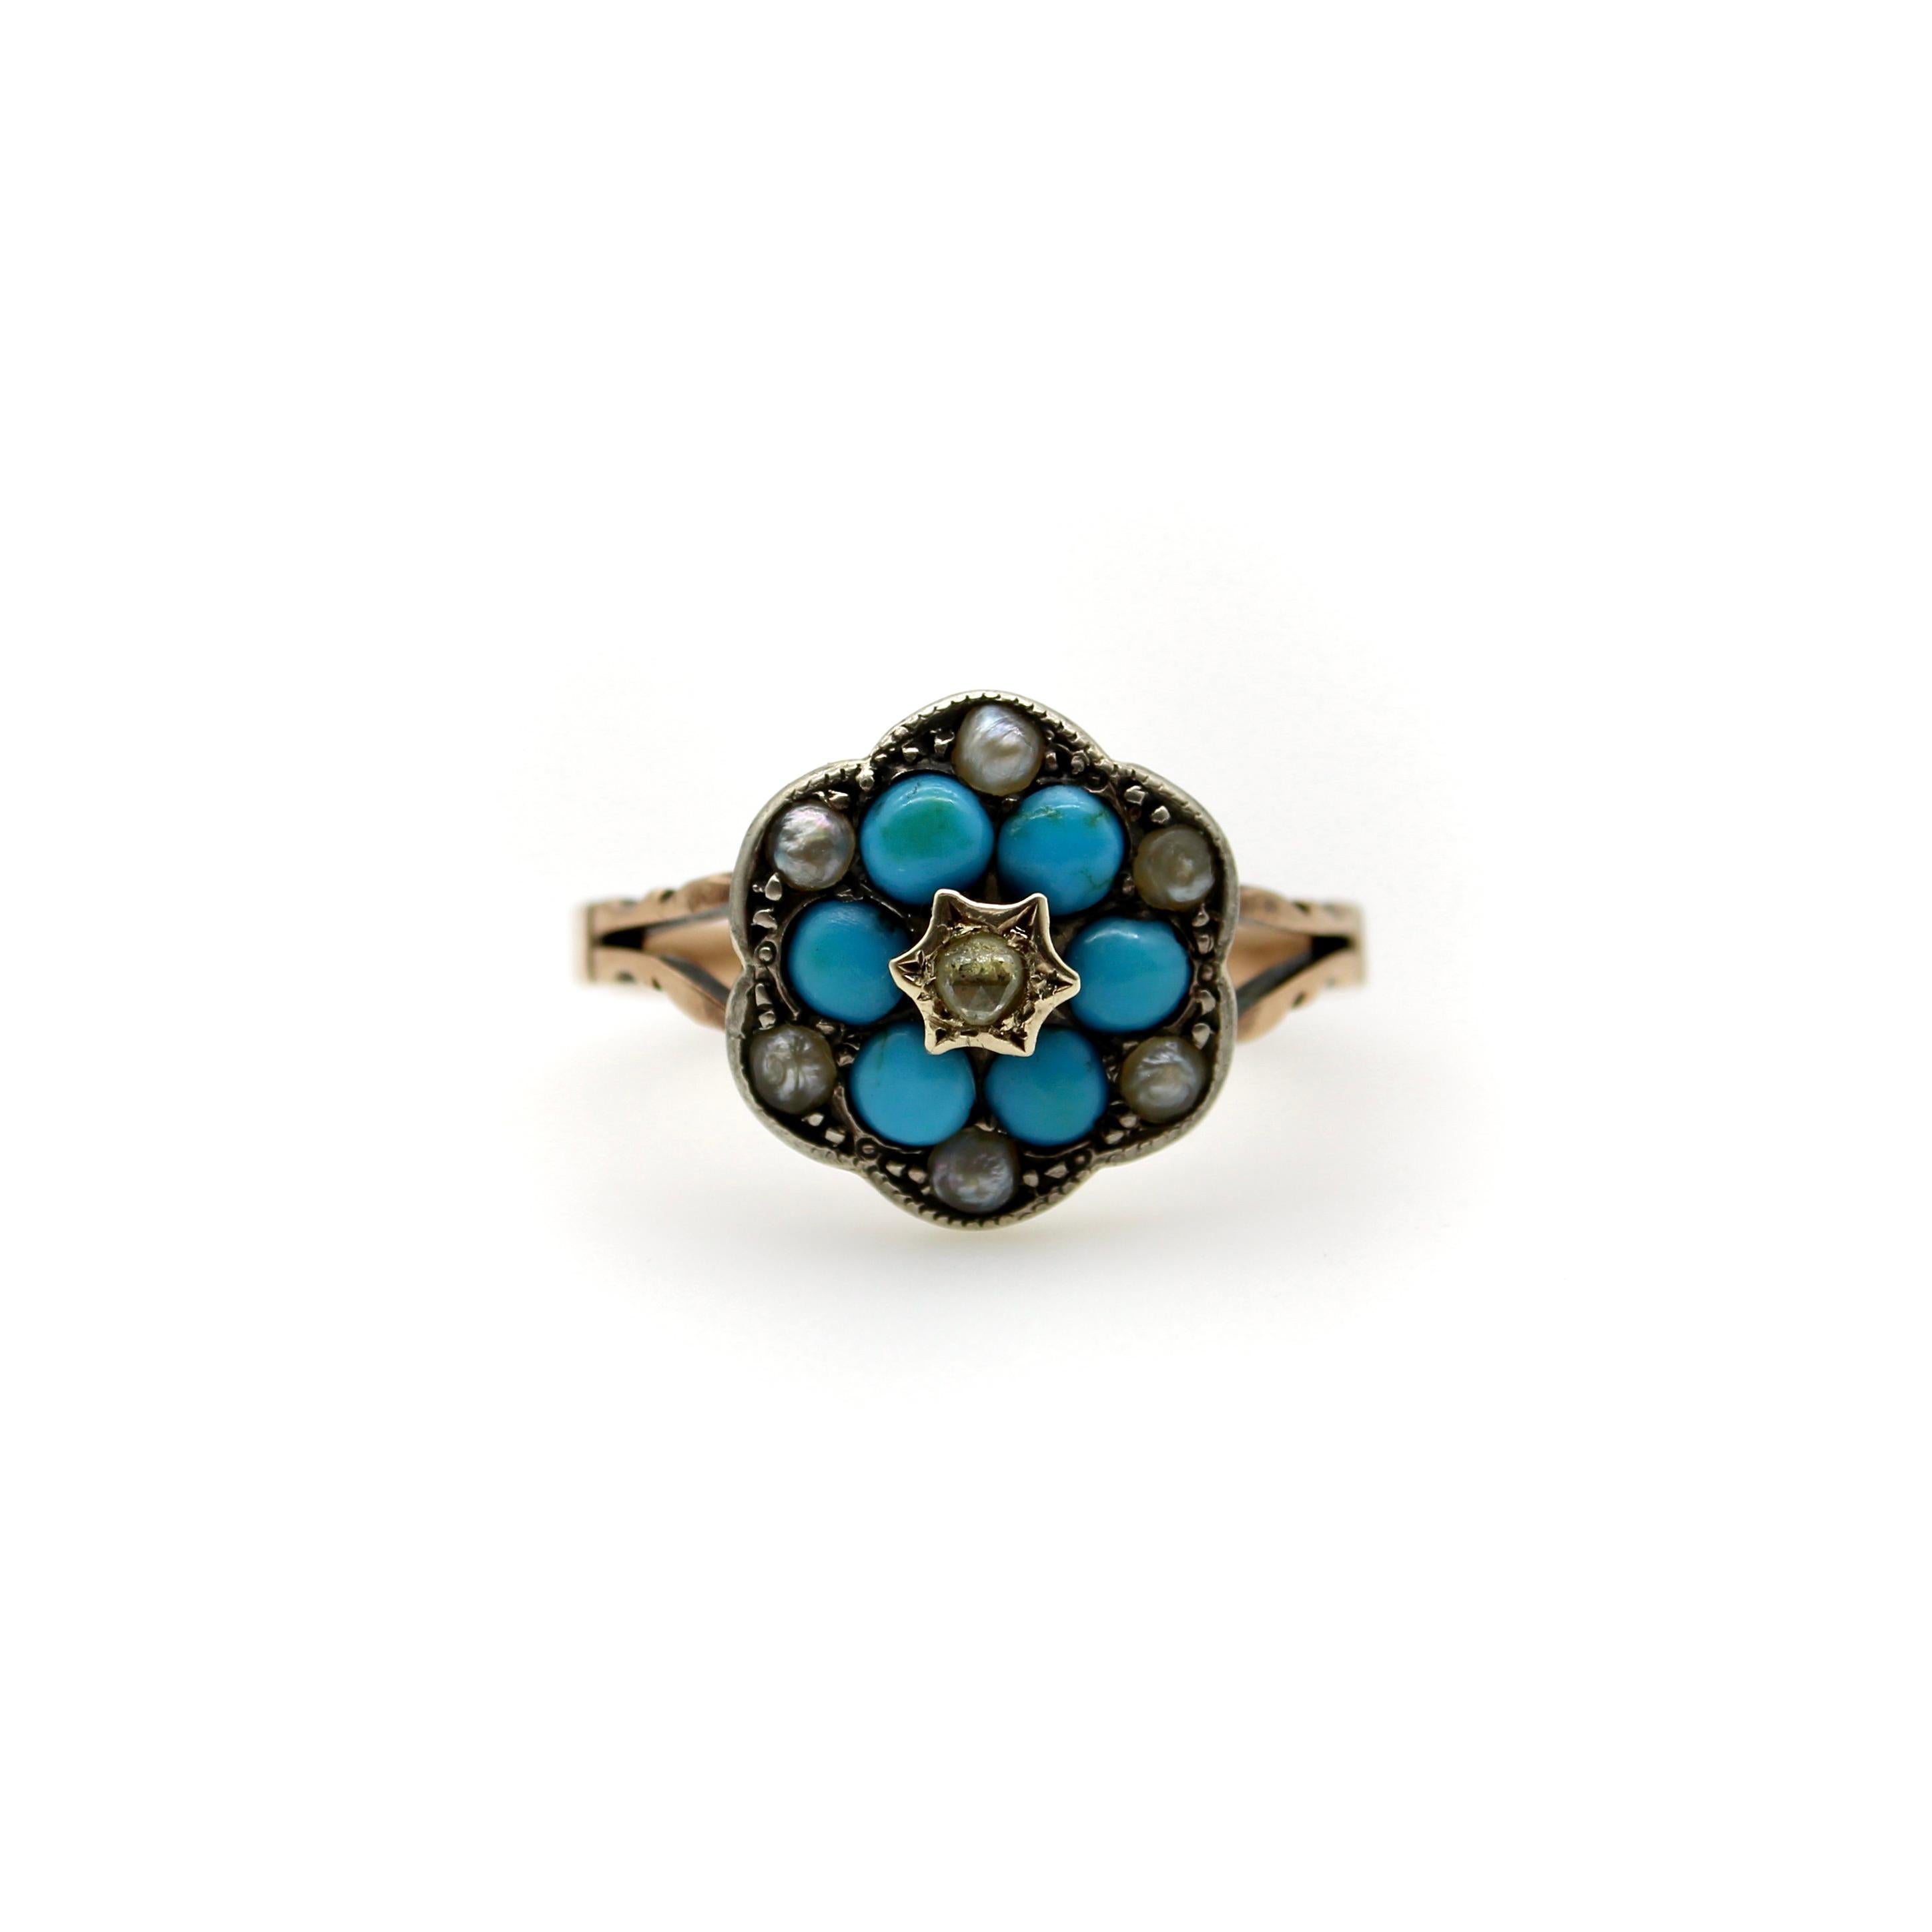 This 12k gold early Victorian ring features a flower motif of vibrant turquoise. In the center is a Rose Cut diamond set into a hand-carved star that enhances the sparkling beauty of the diamond. The turquoise flower is surrounded by bead set